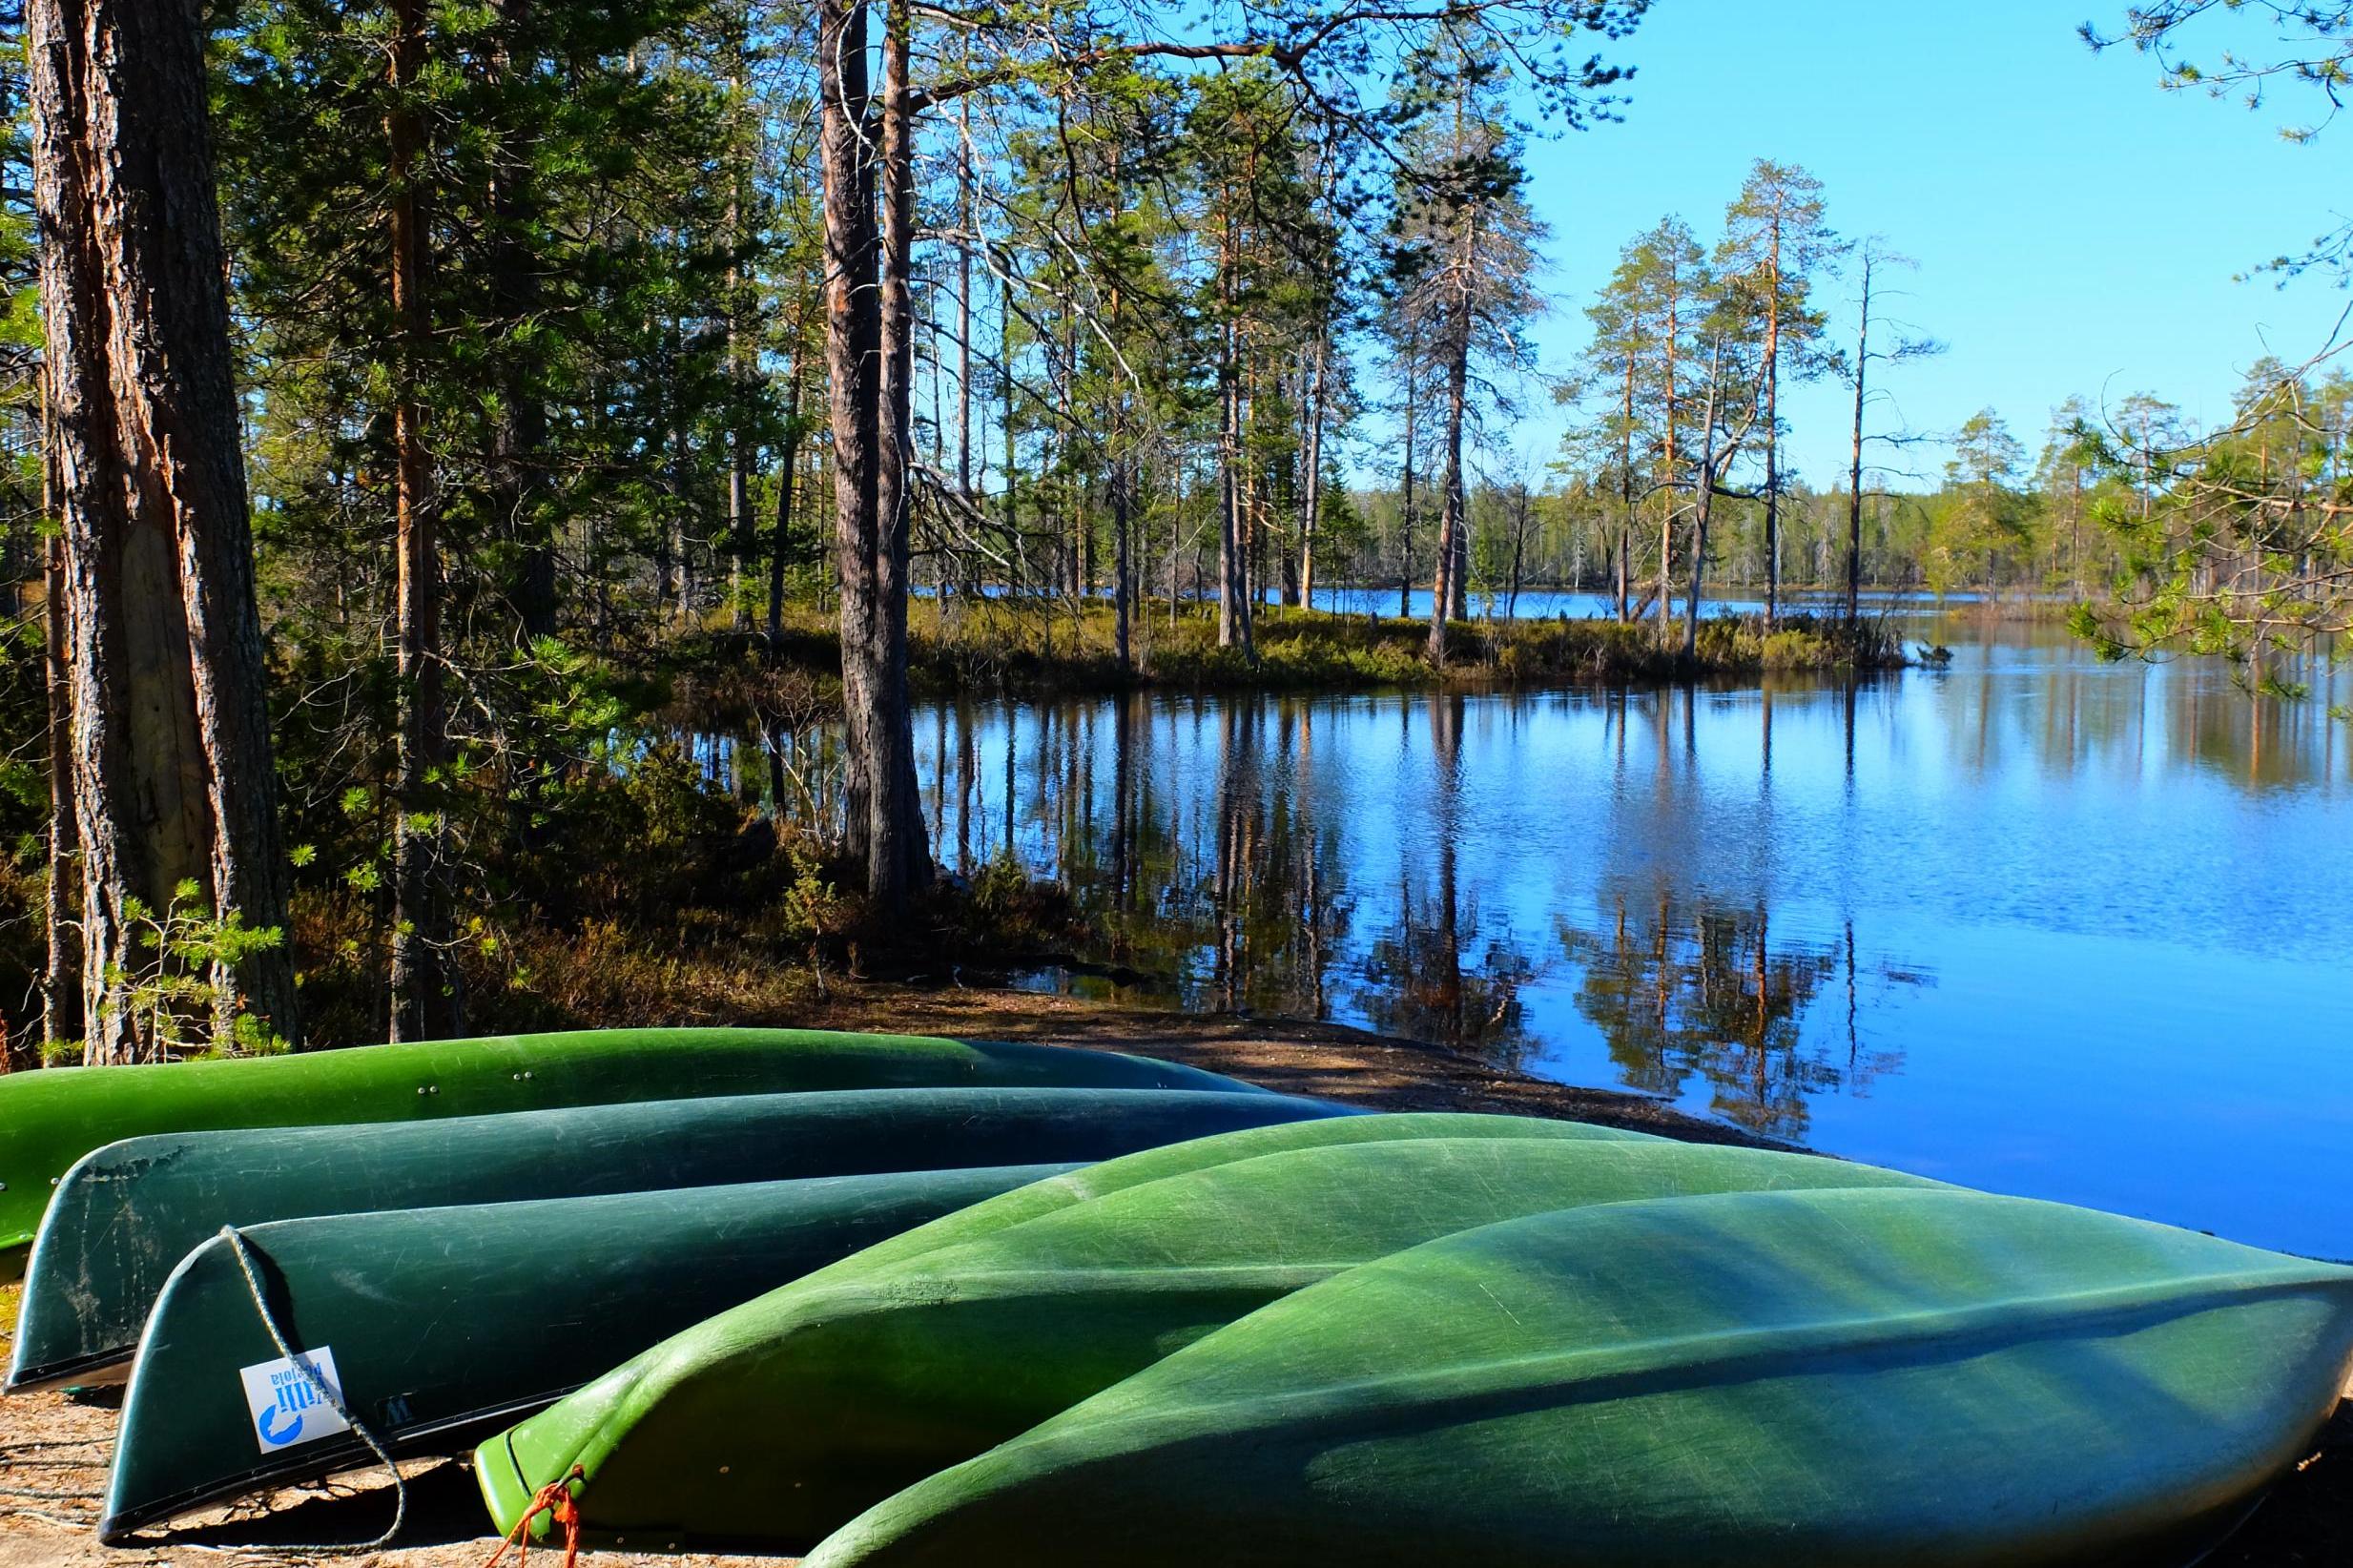 Hossa national park offers plentiful outdoor pursuits such as canoeing